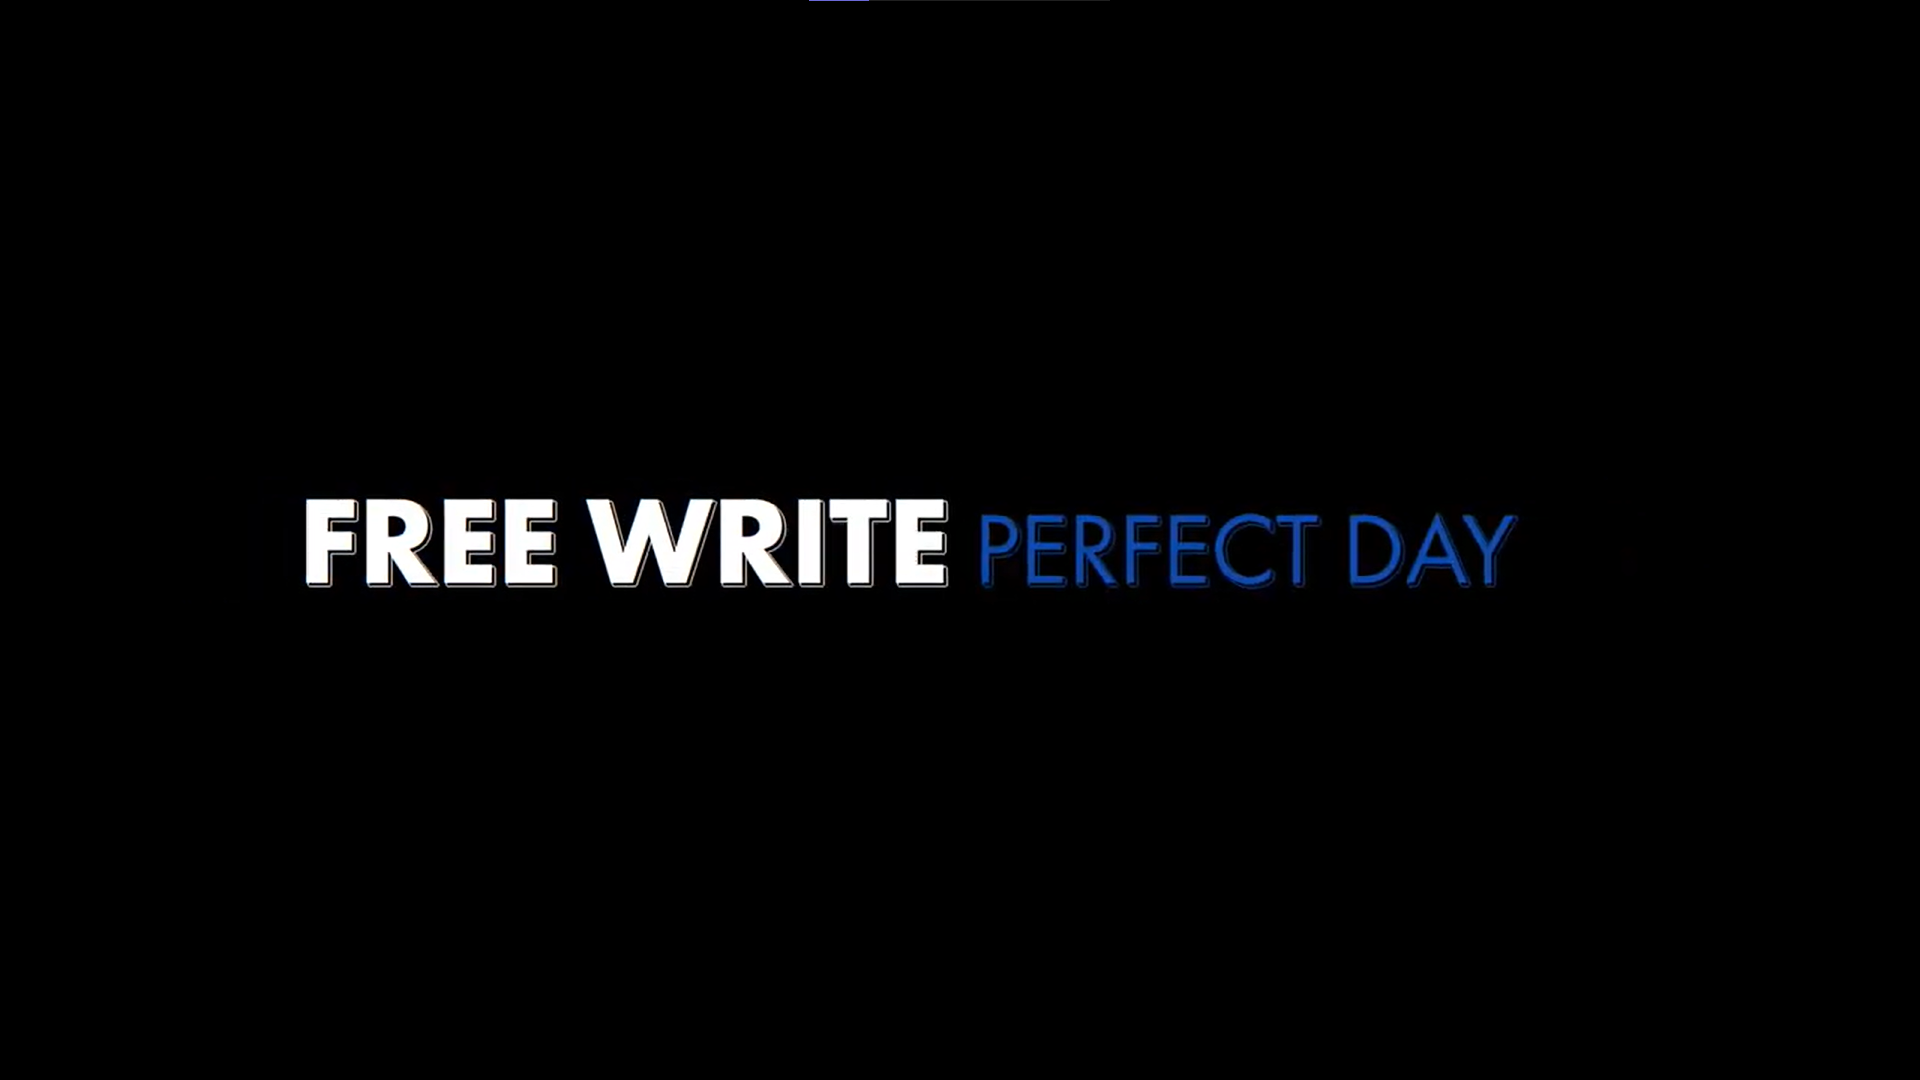 "Perfect Day" Free Write Title Card